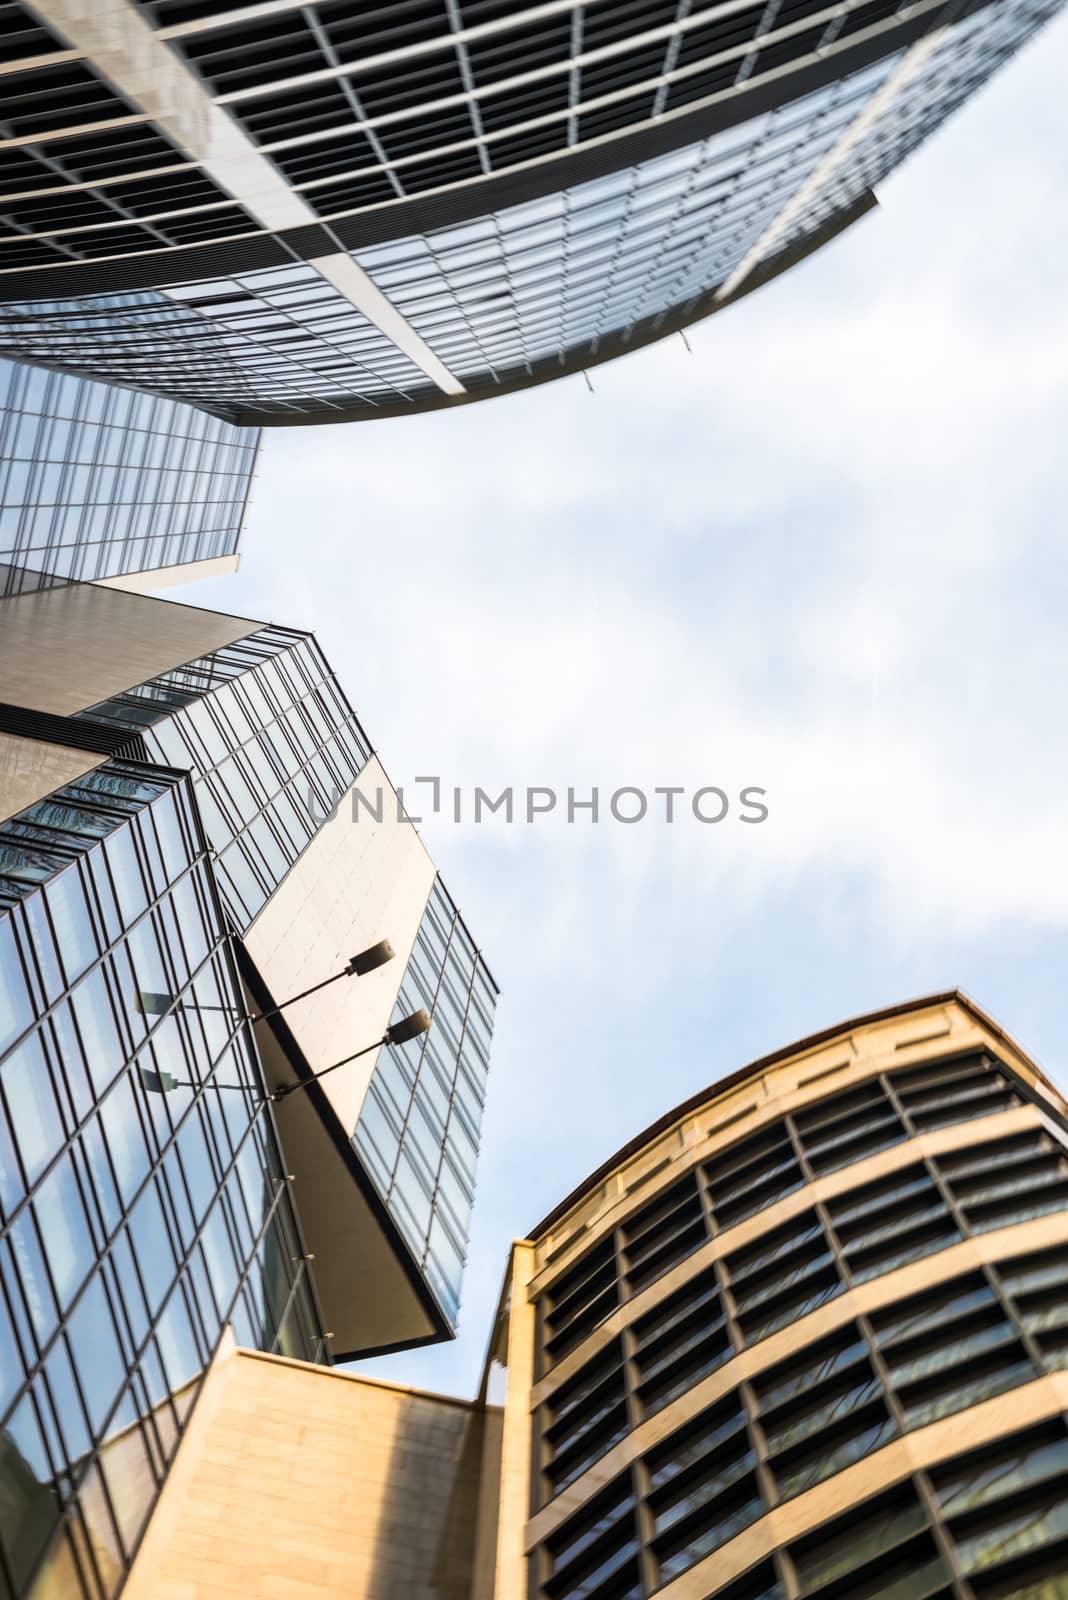 Modern high-rise buildings with glass wall surfaces.